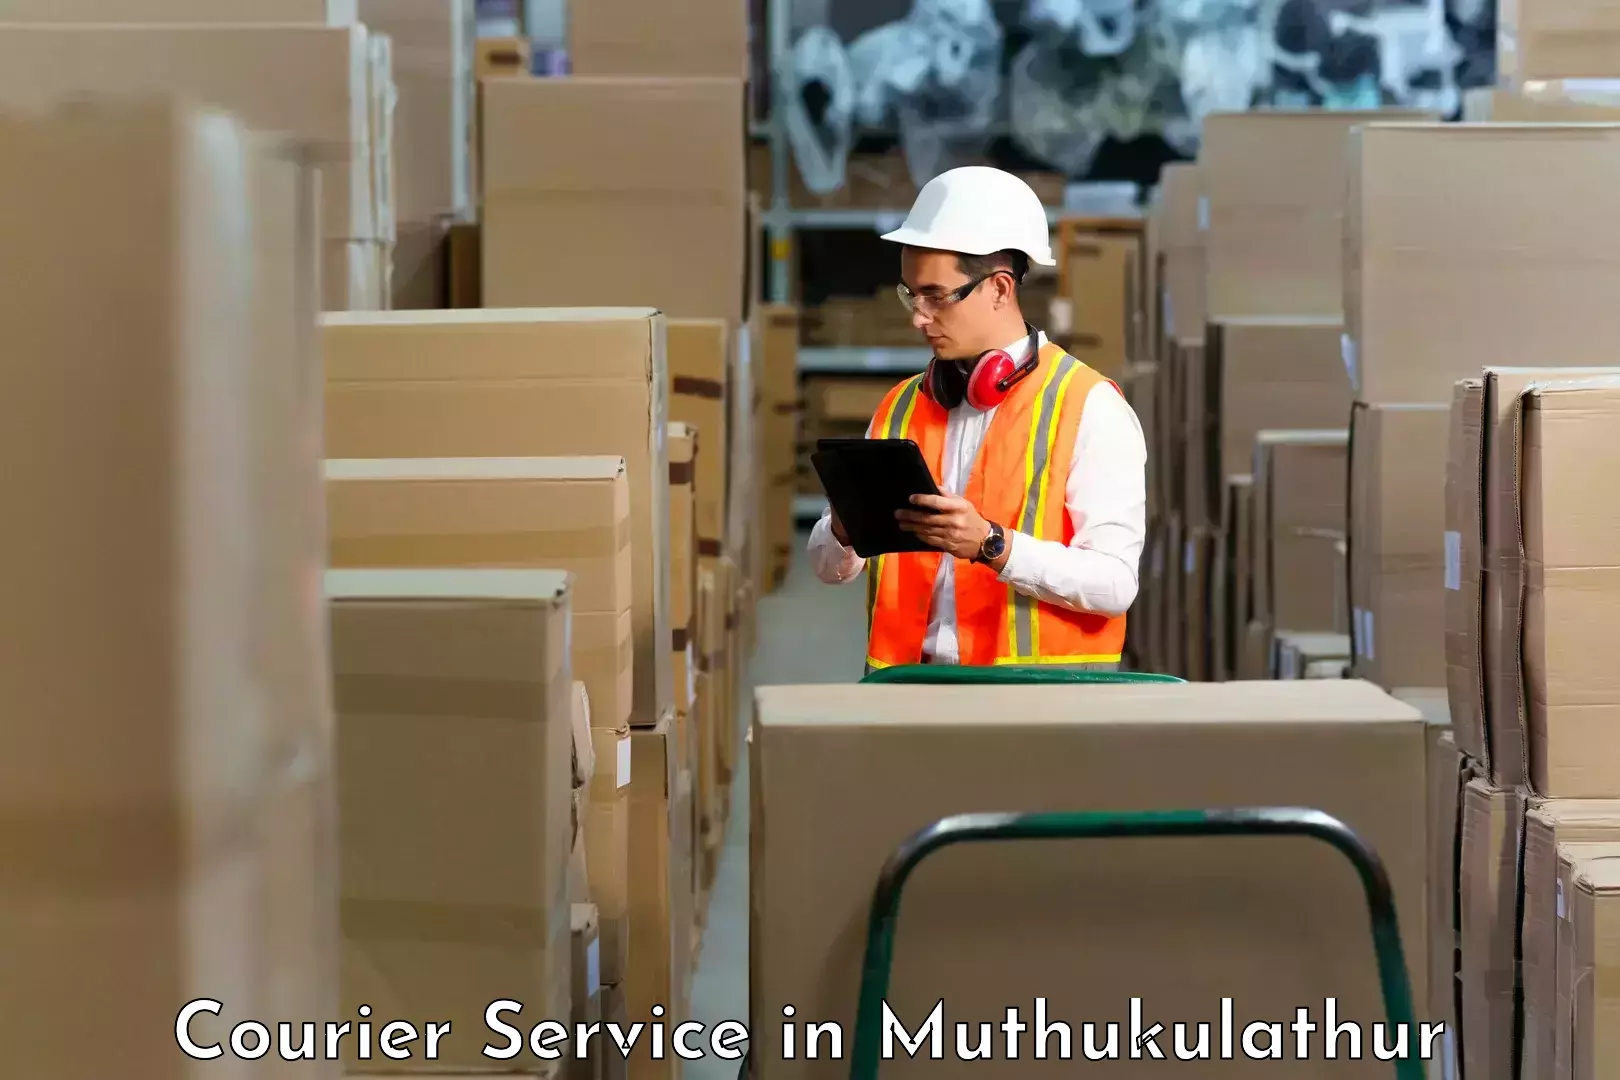 Punctual parcel services in Muthukulathur